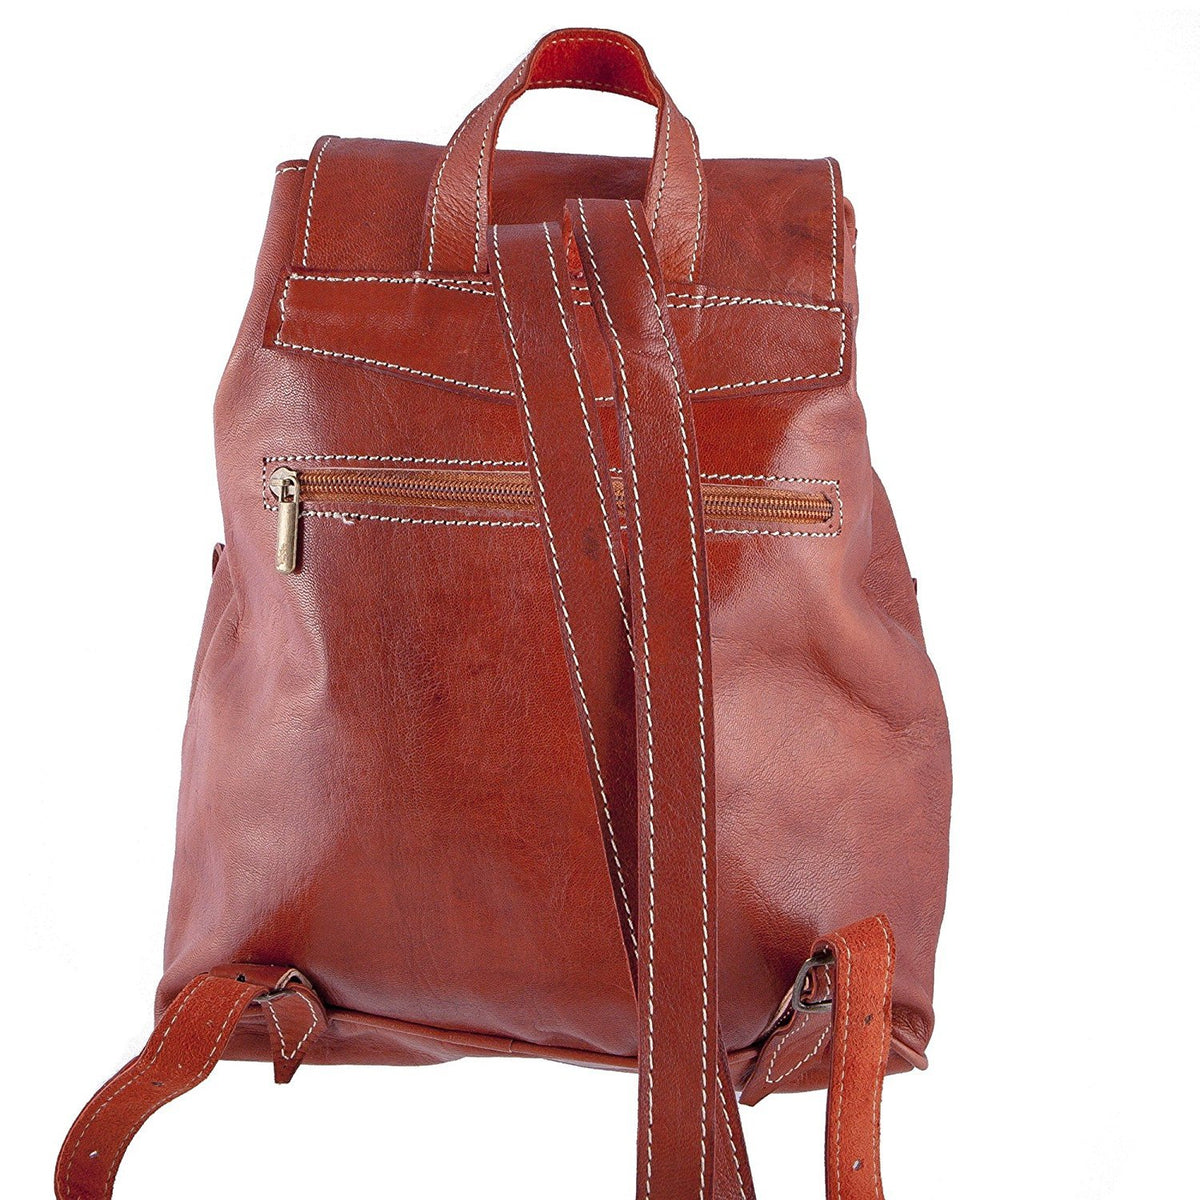 Vintage style women's leather backpack - Handmade - Blue